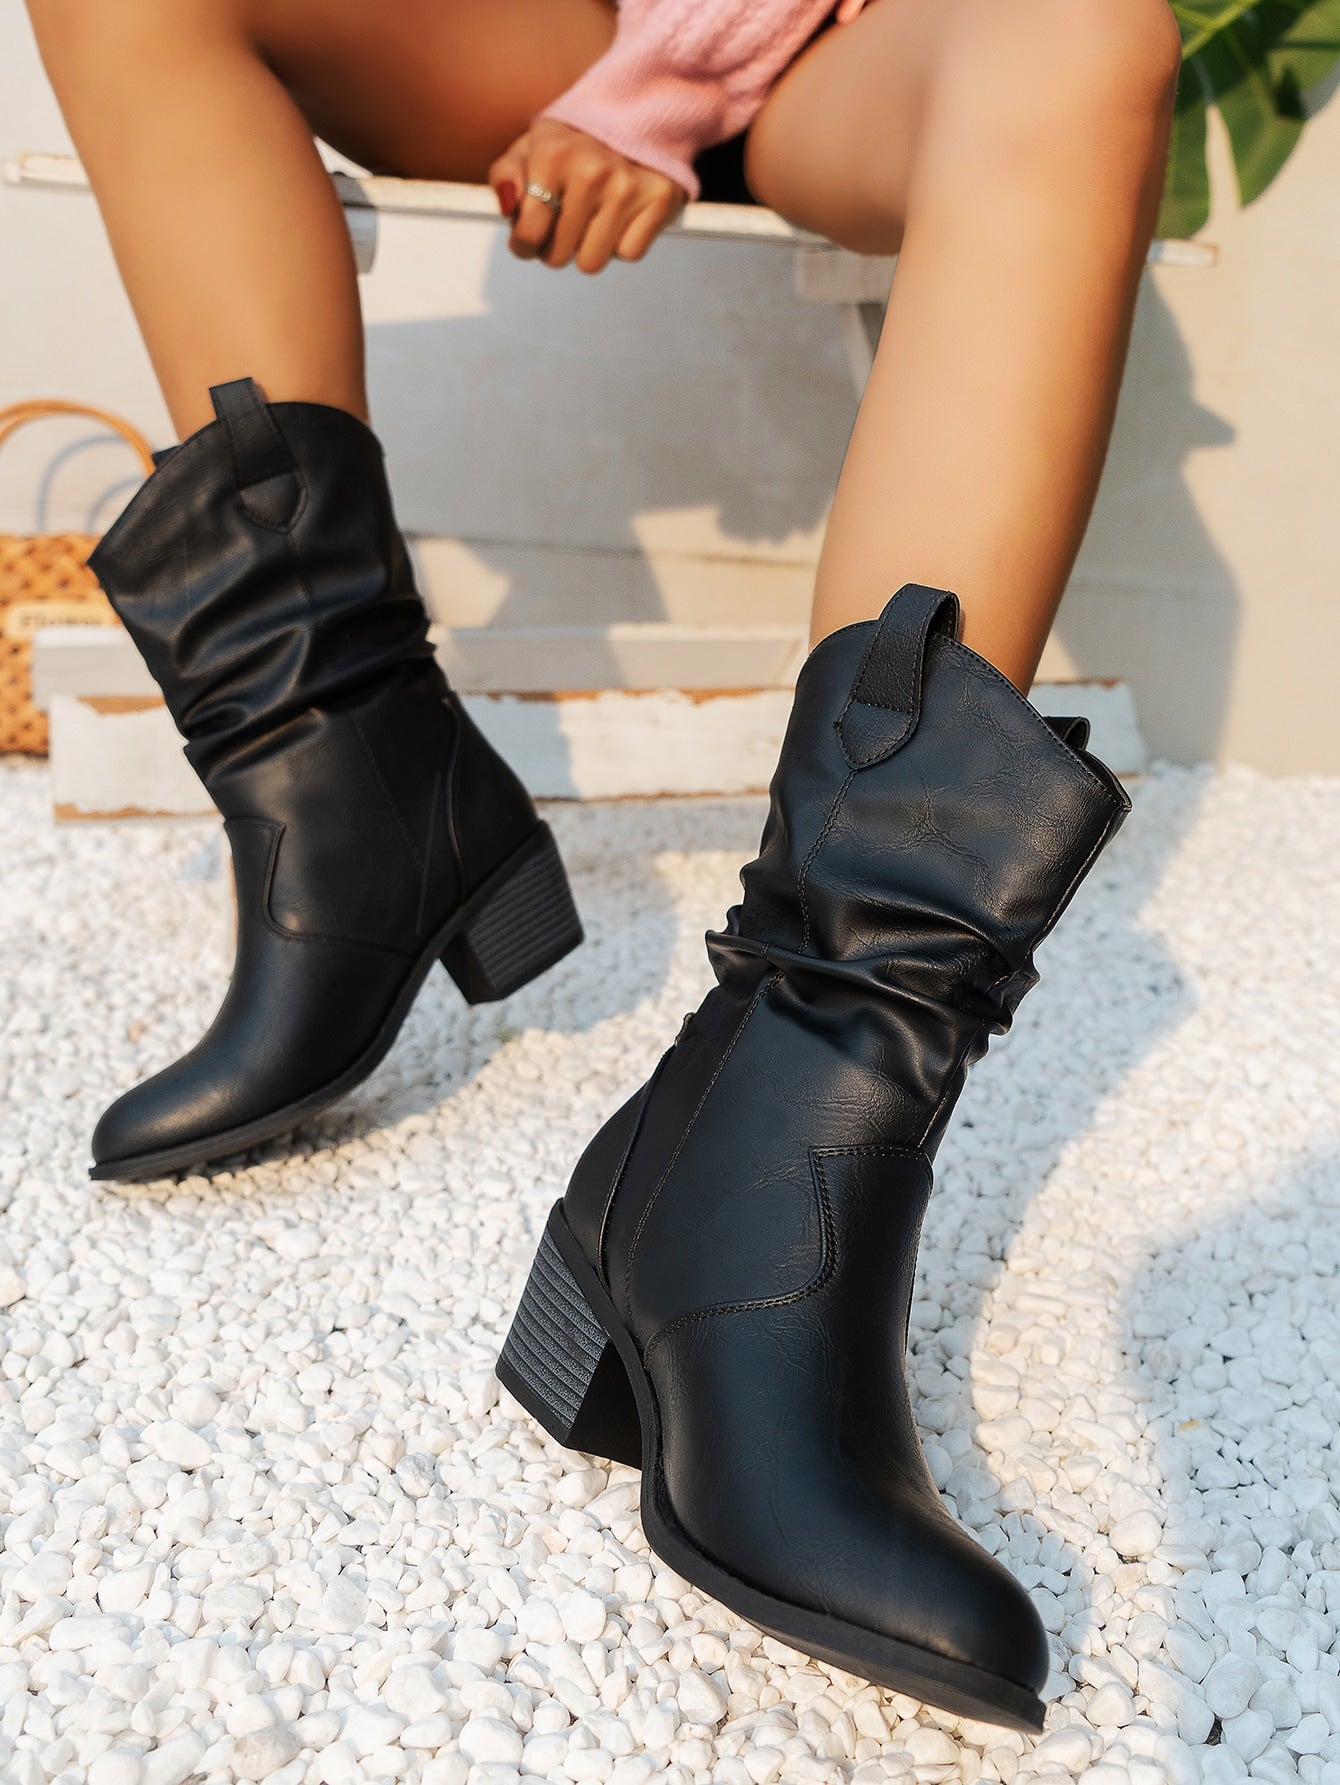 Patched Hippie Style Fashion Boots Pointed Toe Block Heel